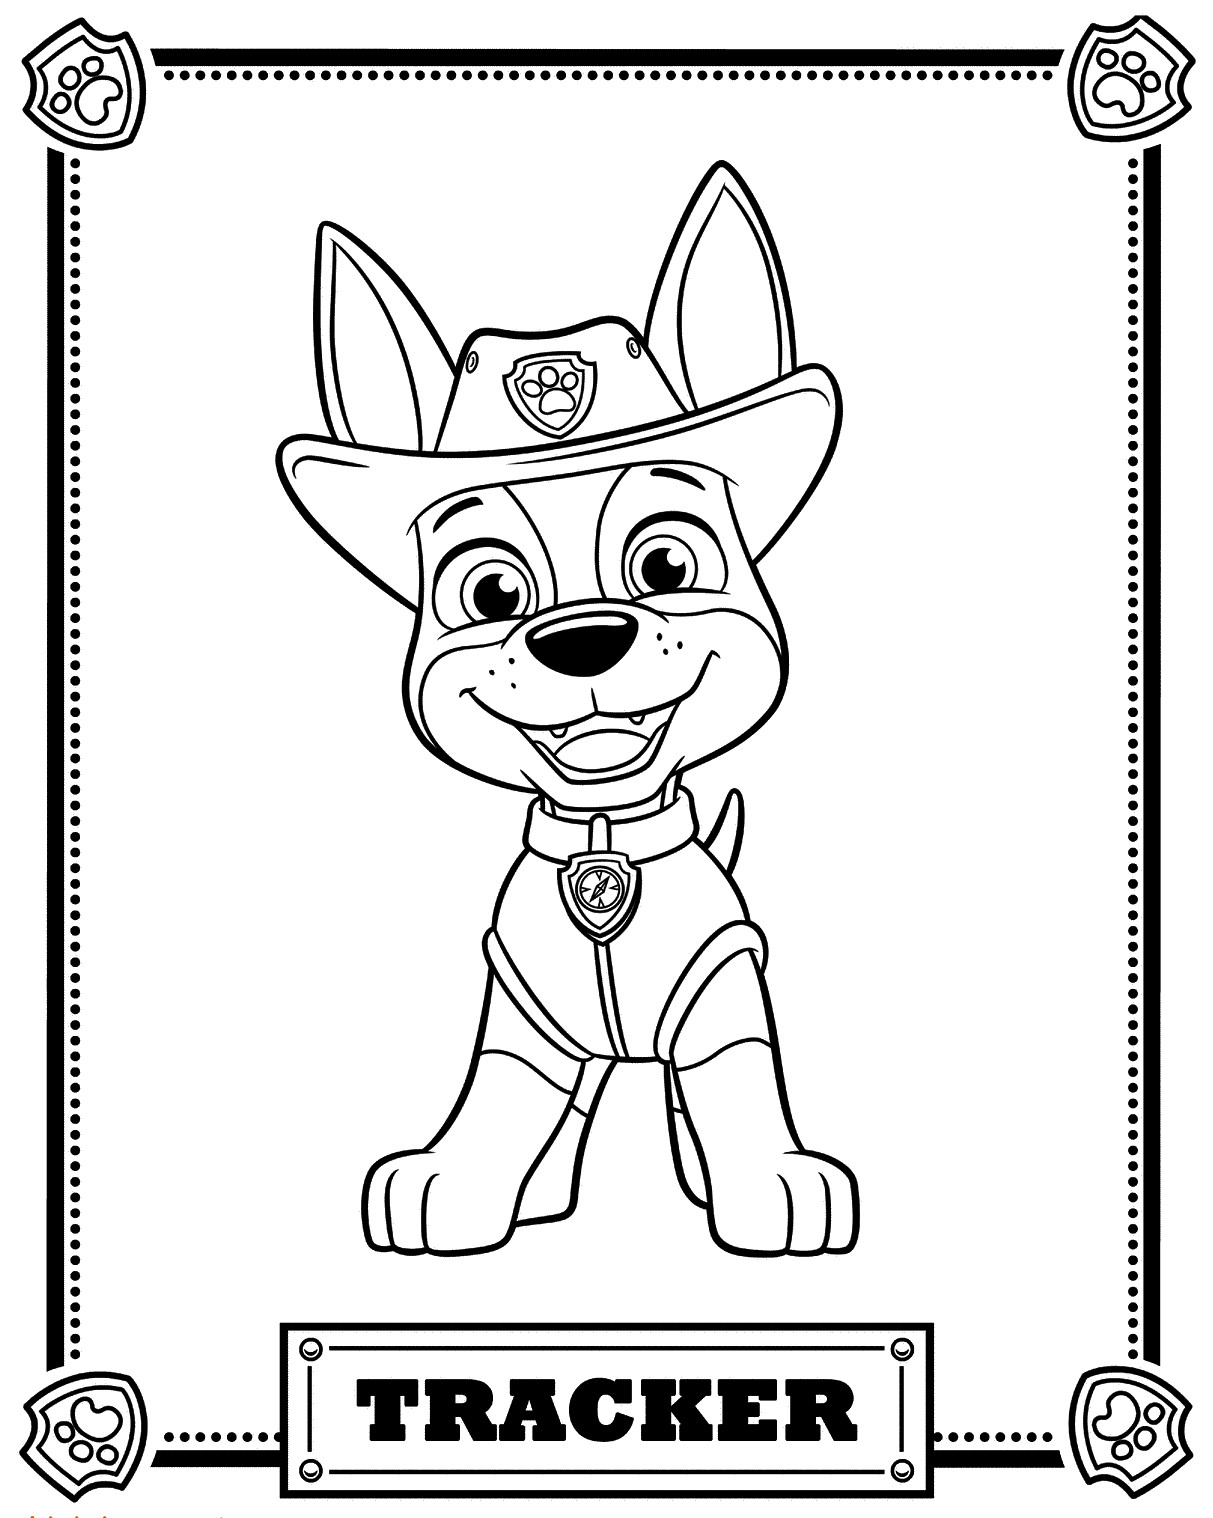 Coloring Pages Boys Paw Patrol
 Top 10 PAW Patrol Coloring Pages